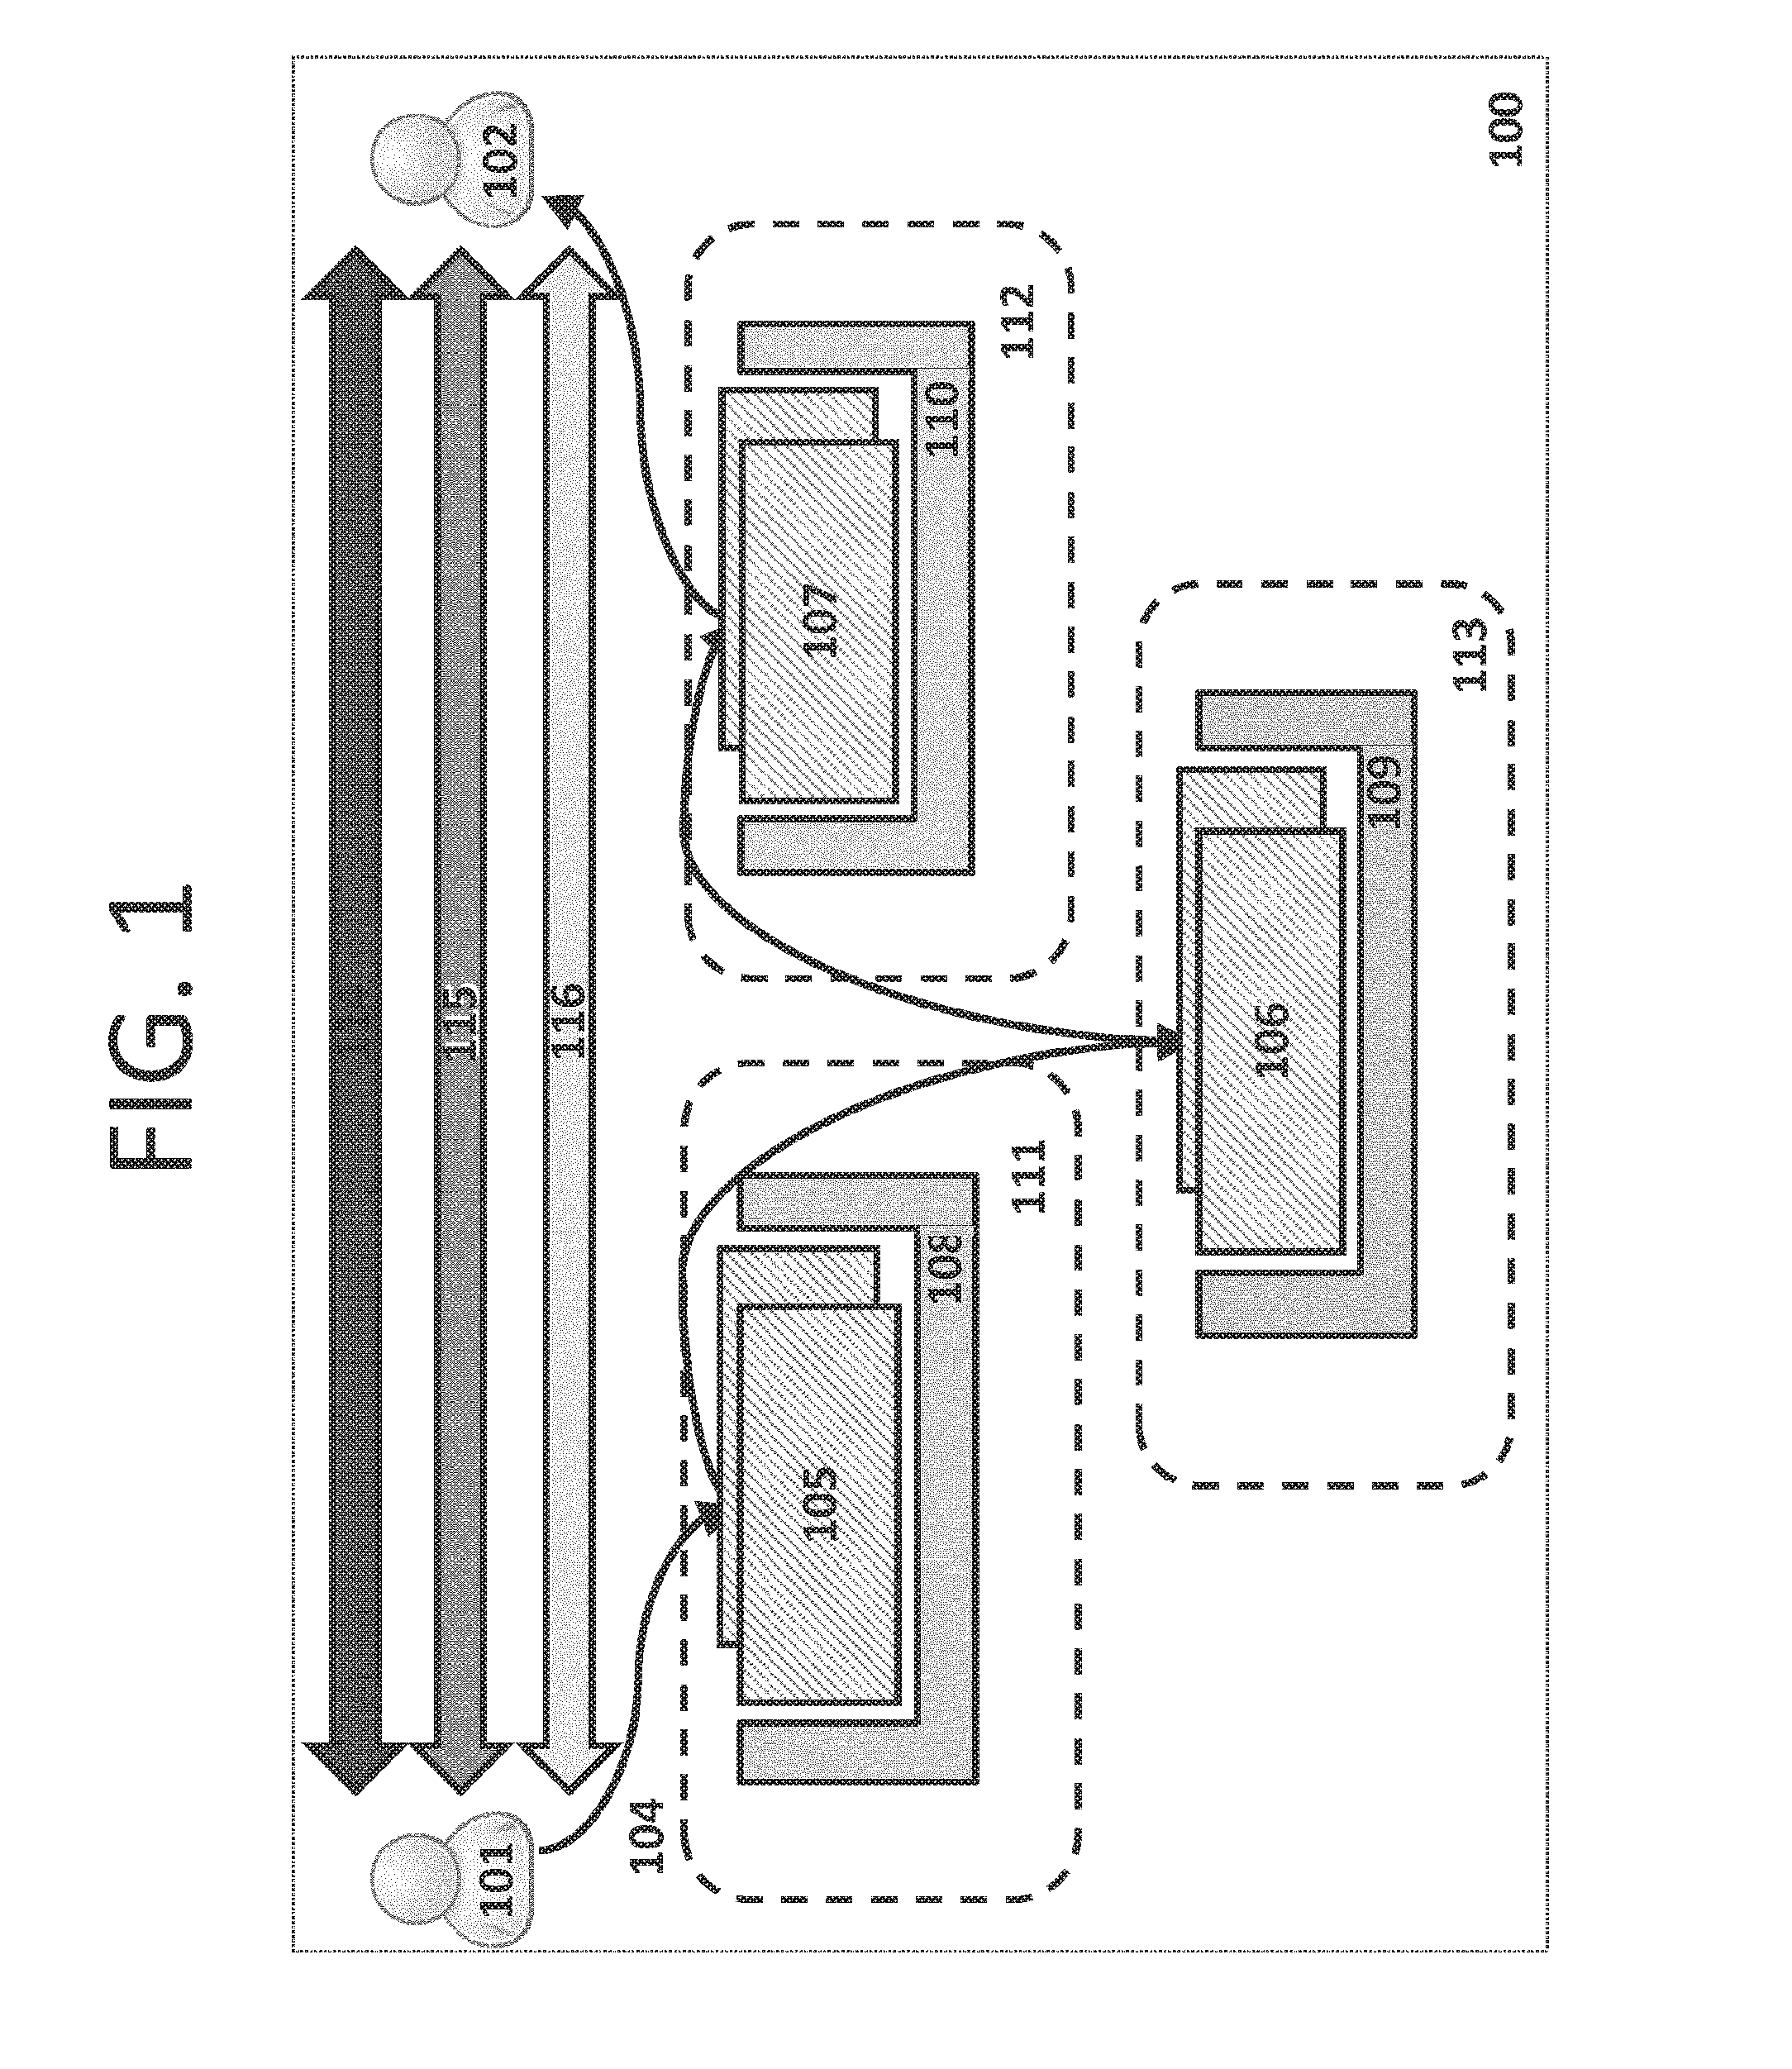 Distributed programmable connection method to establish peer-to-peer multimedia interactions